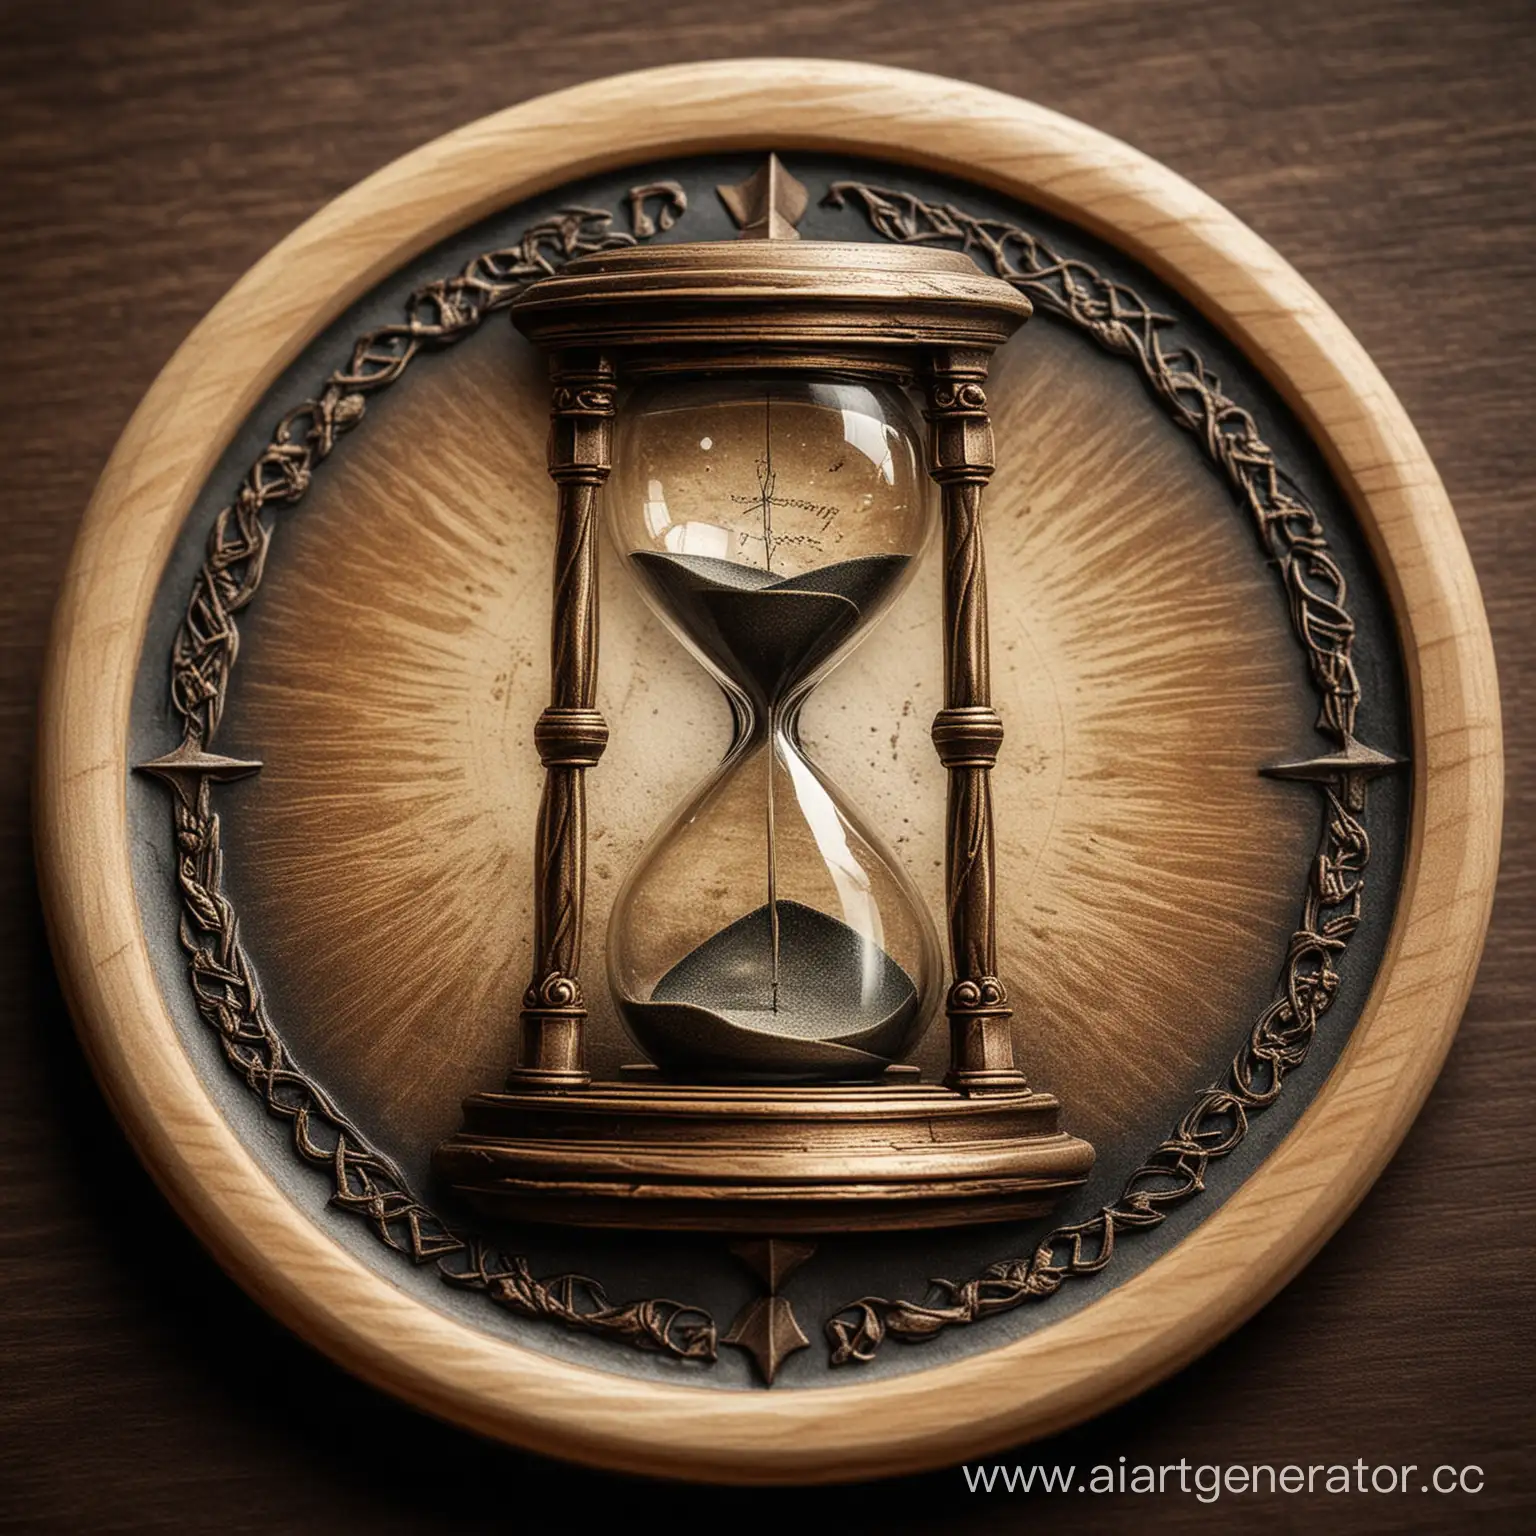 a high quality professional photo of a round stamp, emblem featuring an image of an hourglass, symbol representing time and its passage, made in the form of an engraving, art, fantasy, detailed, ancient, mystical, dark and moody lighting, intricate design, unique, mystical atmosphere, antique look, front view, close up, bokeh, high resolution, cinematic, trending in fantasy art community